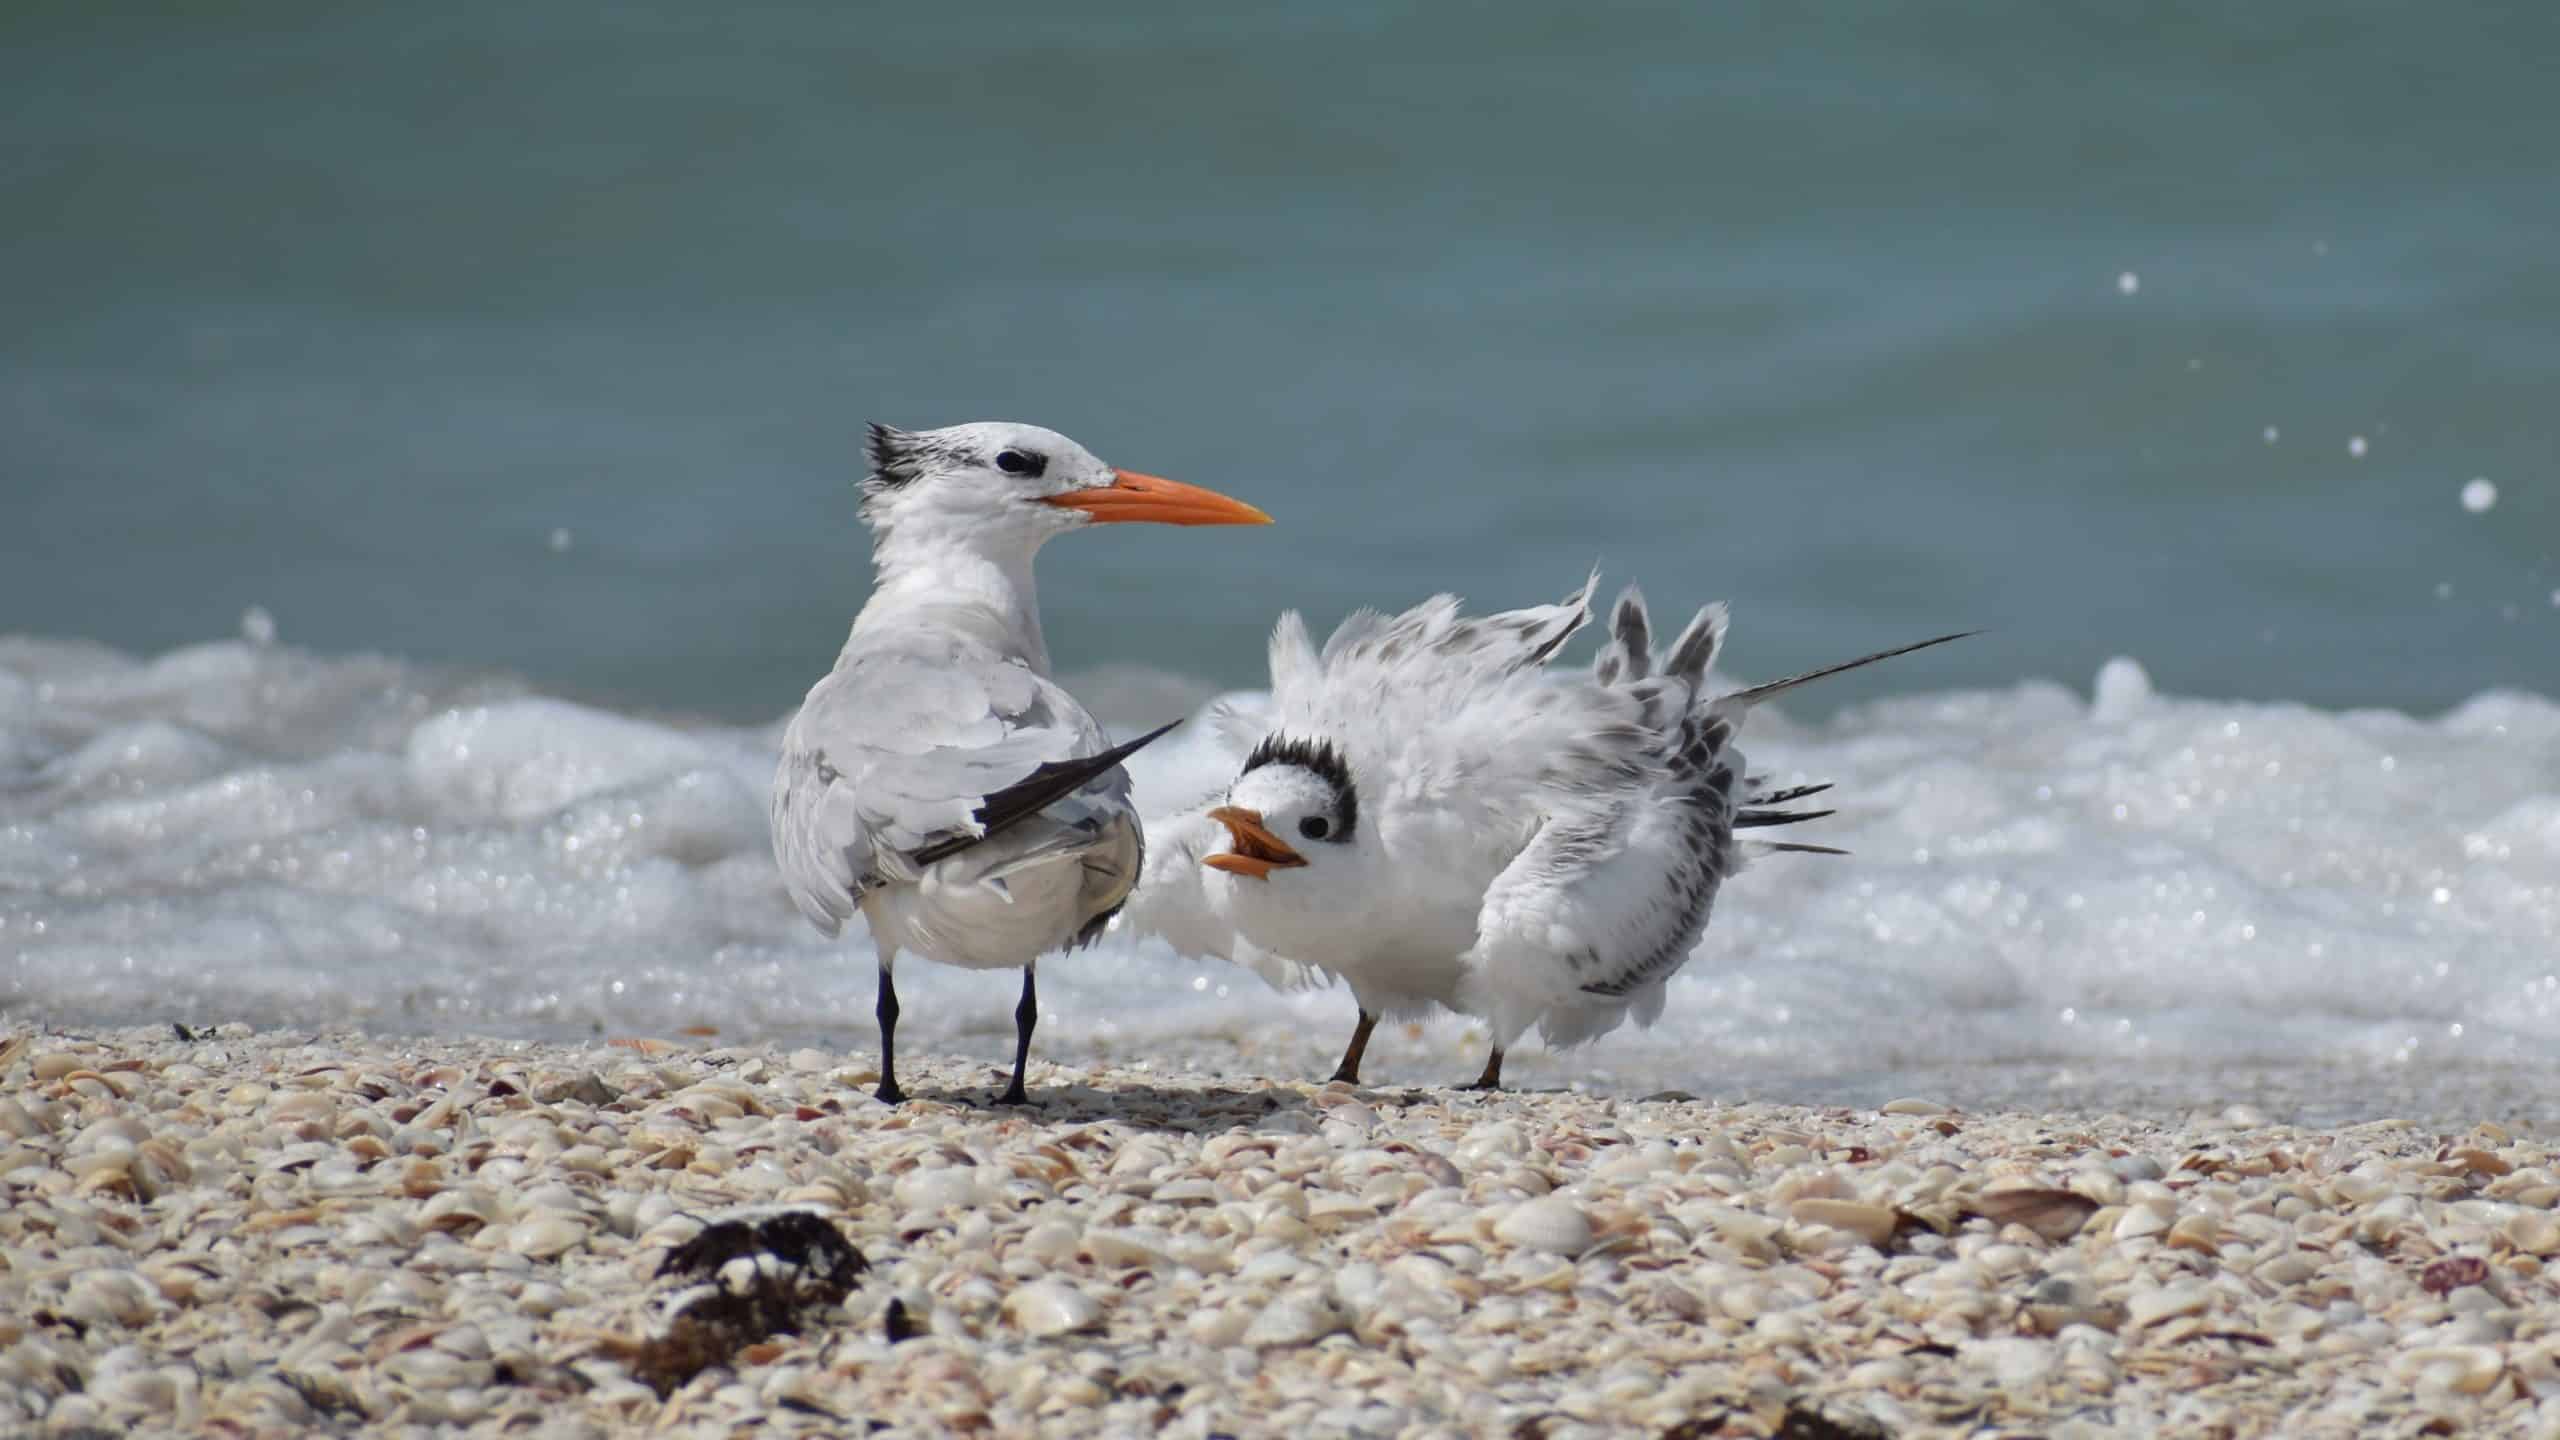 Fledgling royal terns often beg for food from their parents